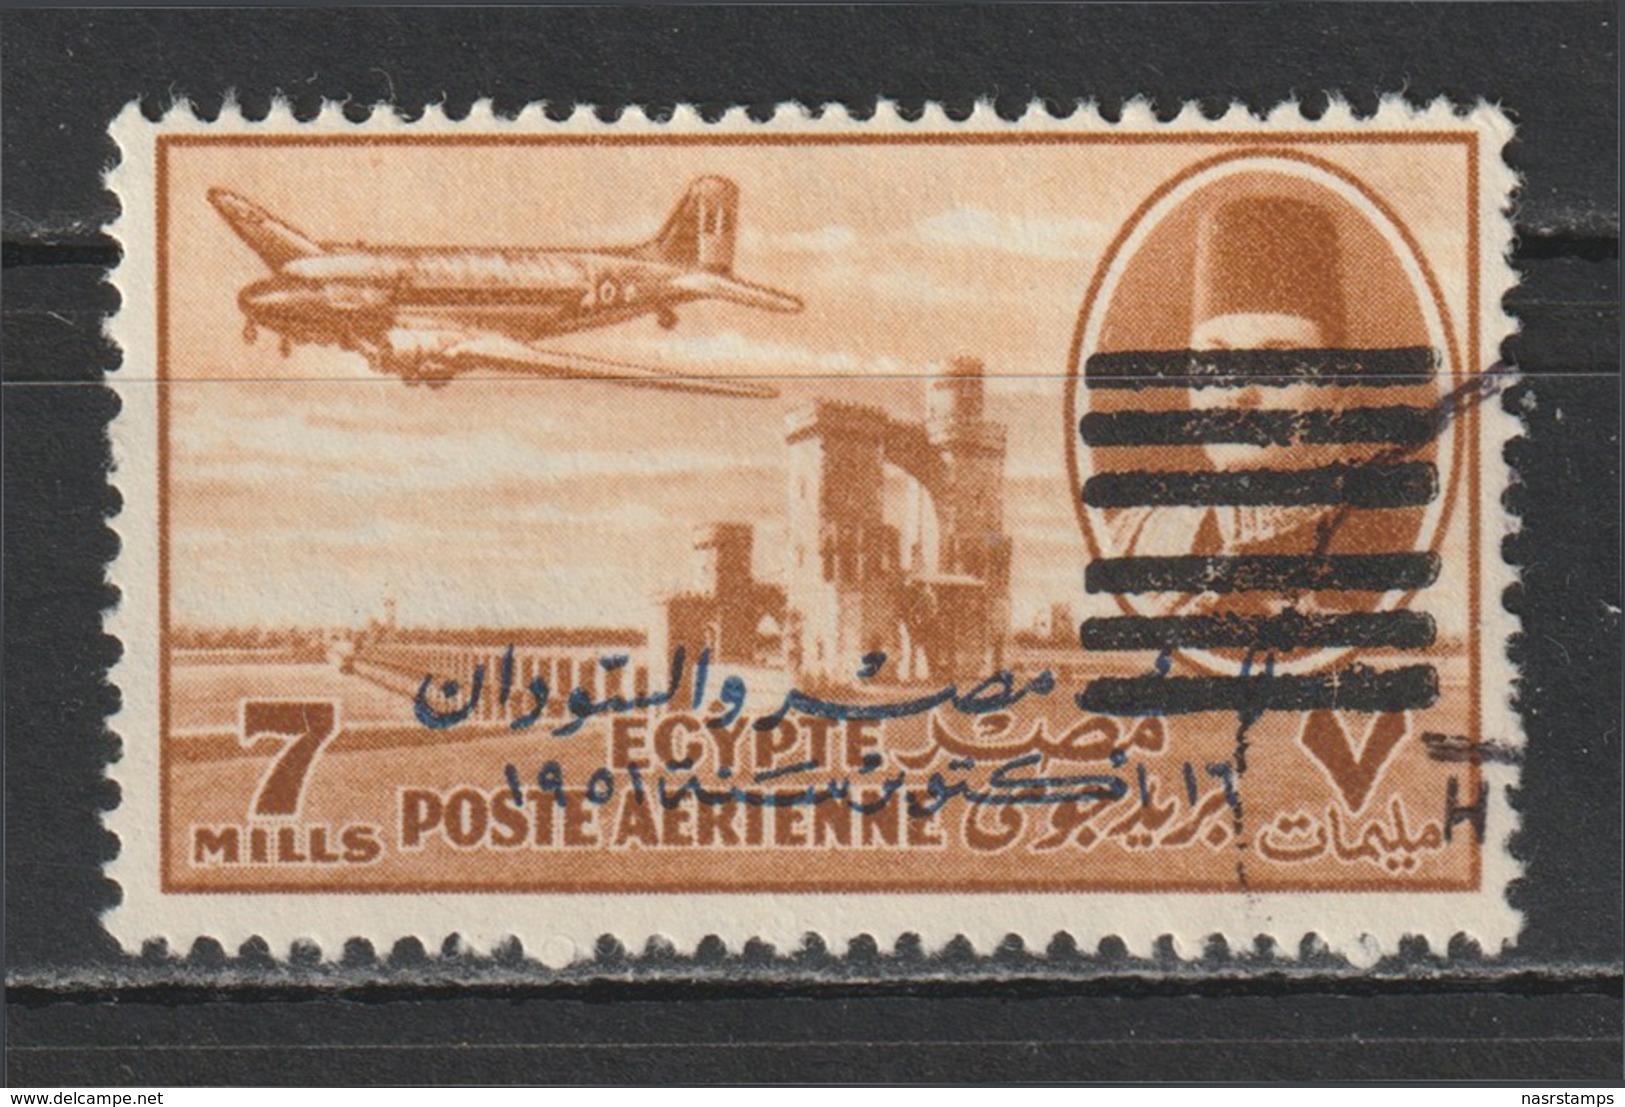 Egypt - 1953 - Unlisted - Unrecorded - Scarce - ( King Farouk - Overprinted 6 Bars On M/s - 7m  ) - Used - No Gum - Used Stamps